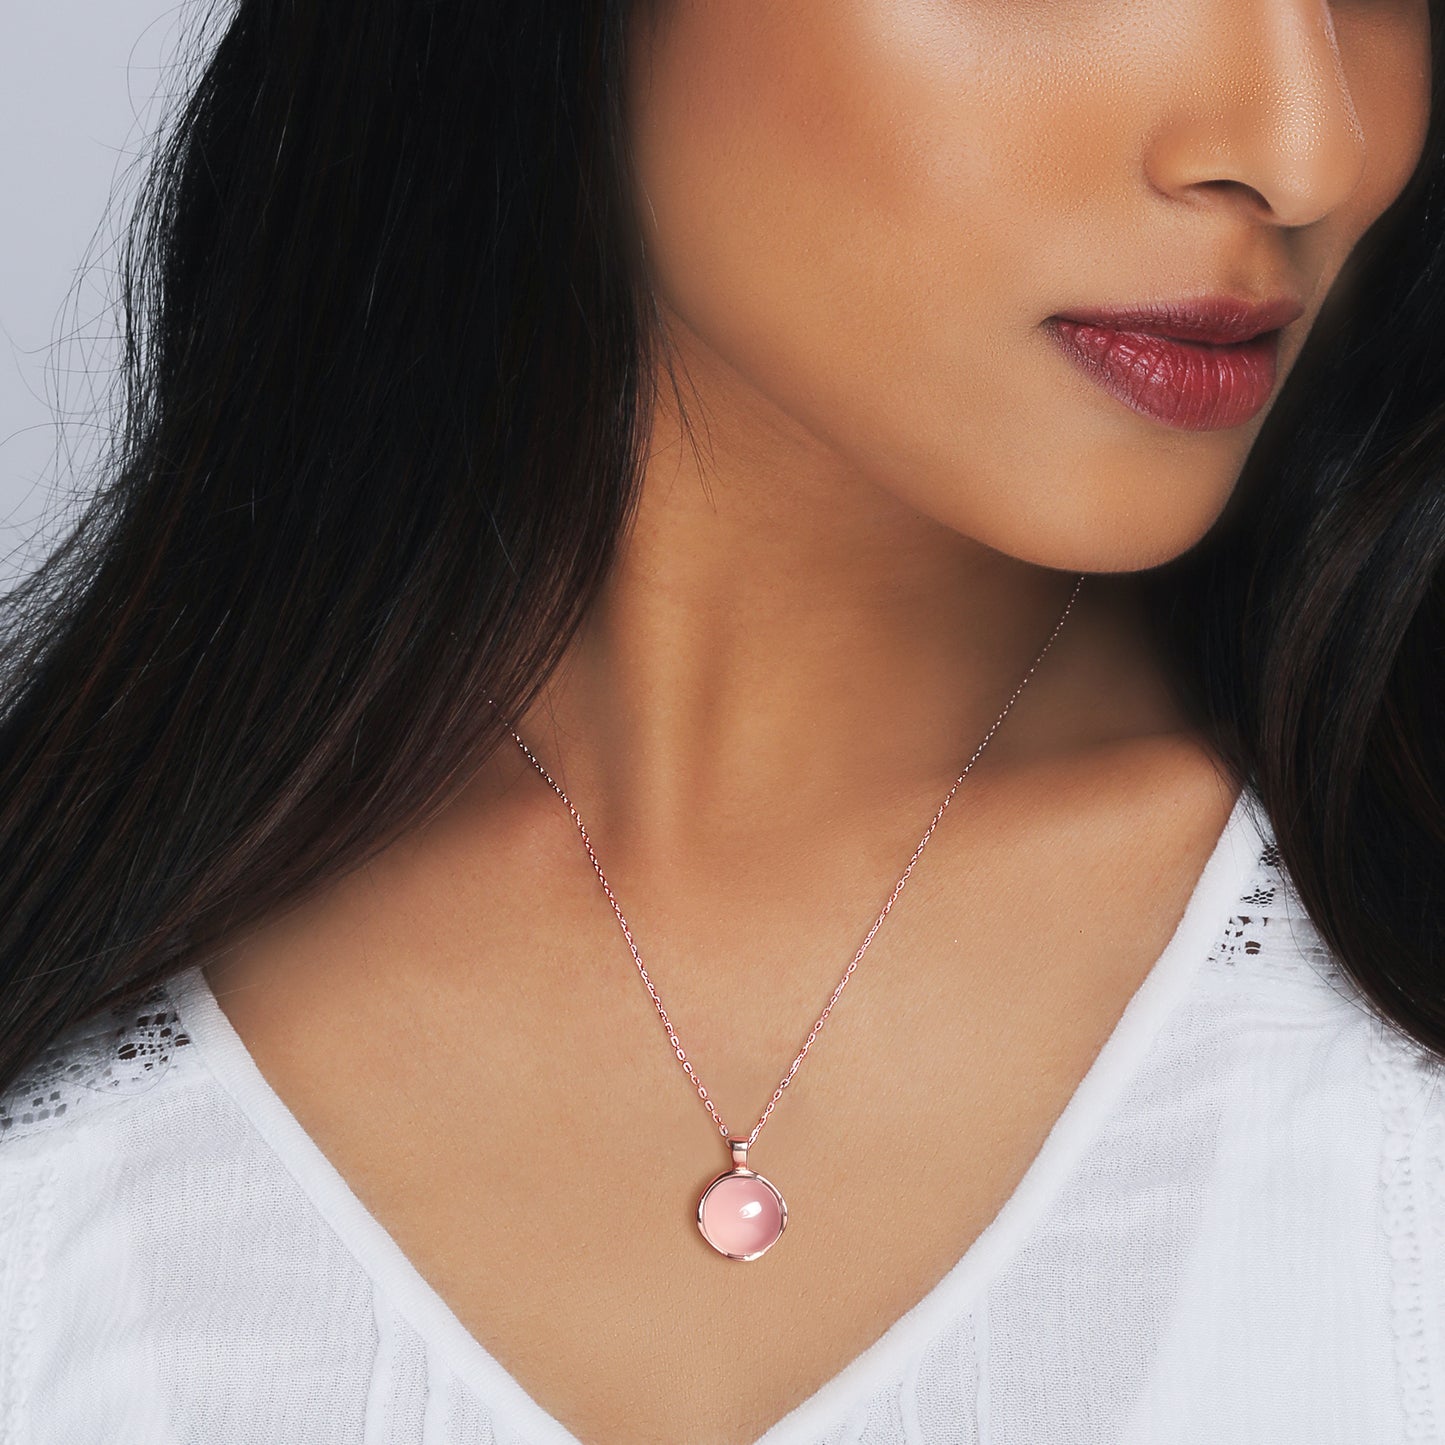 Rose Gold Pink Chalcedony Pendant